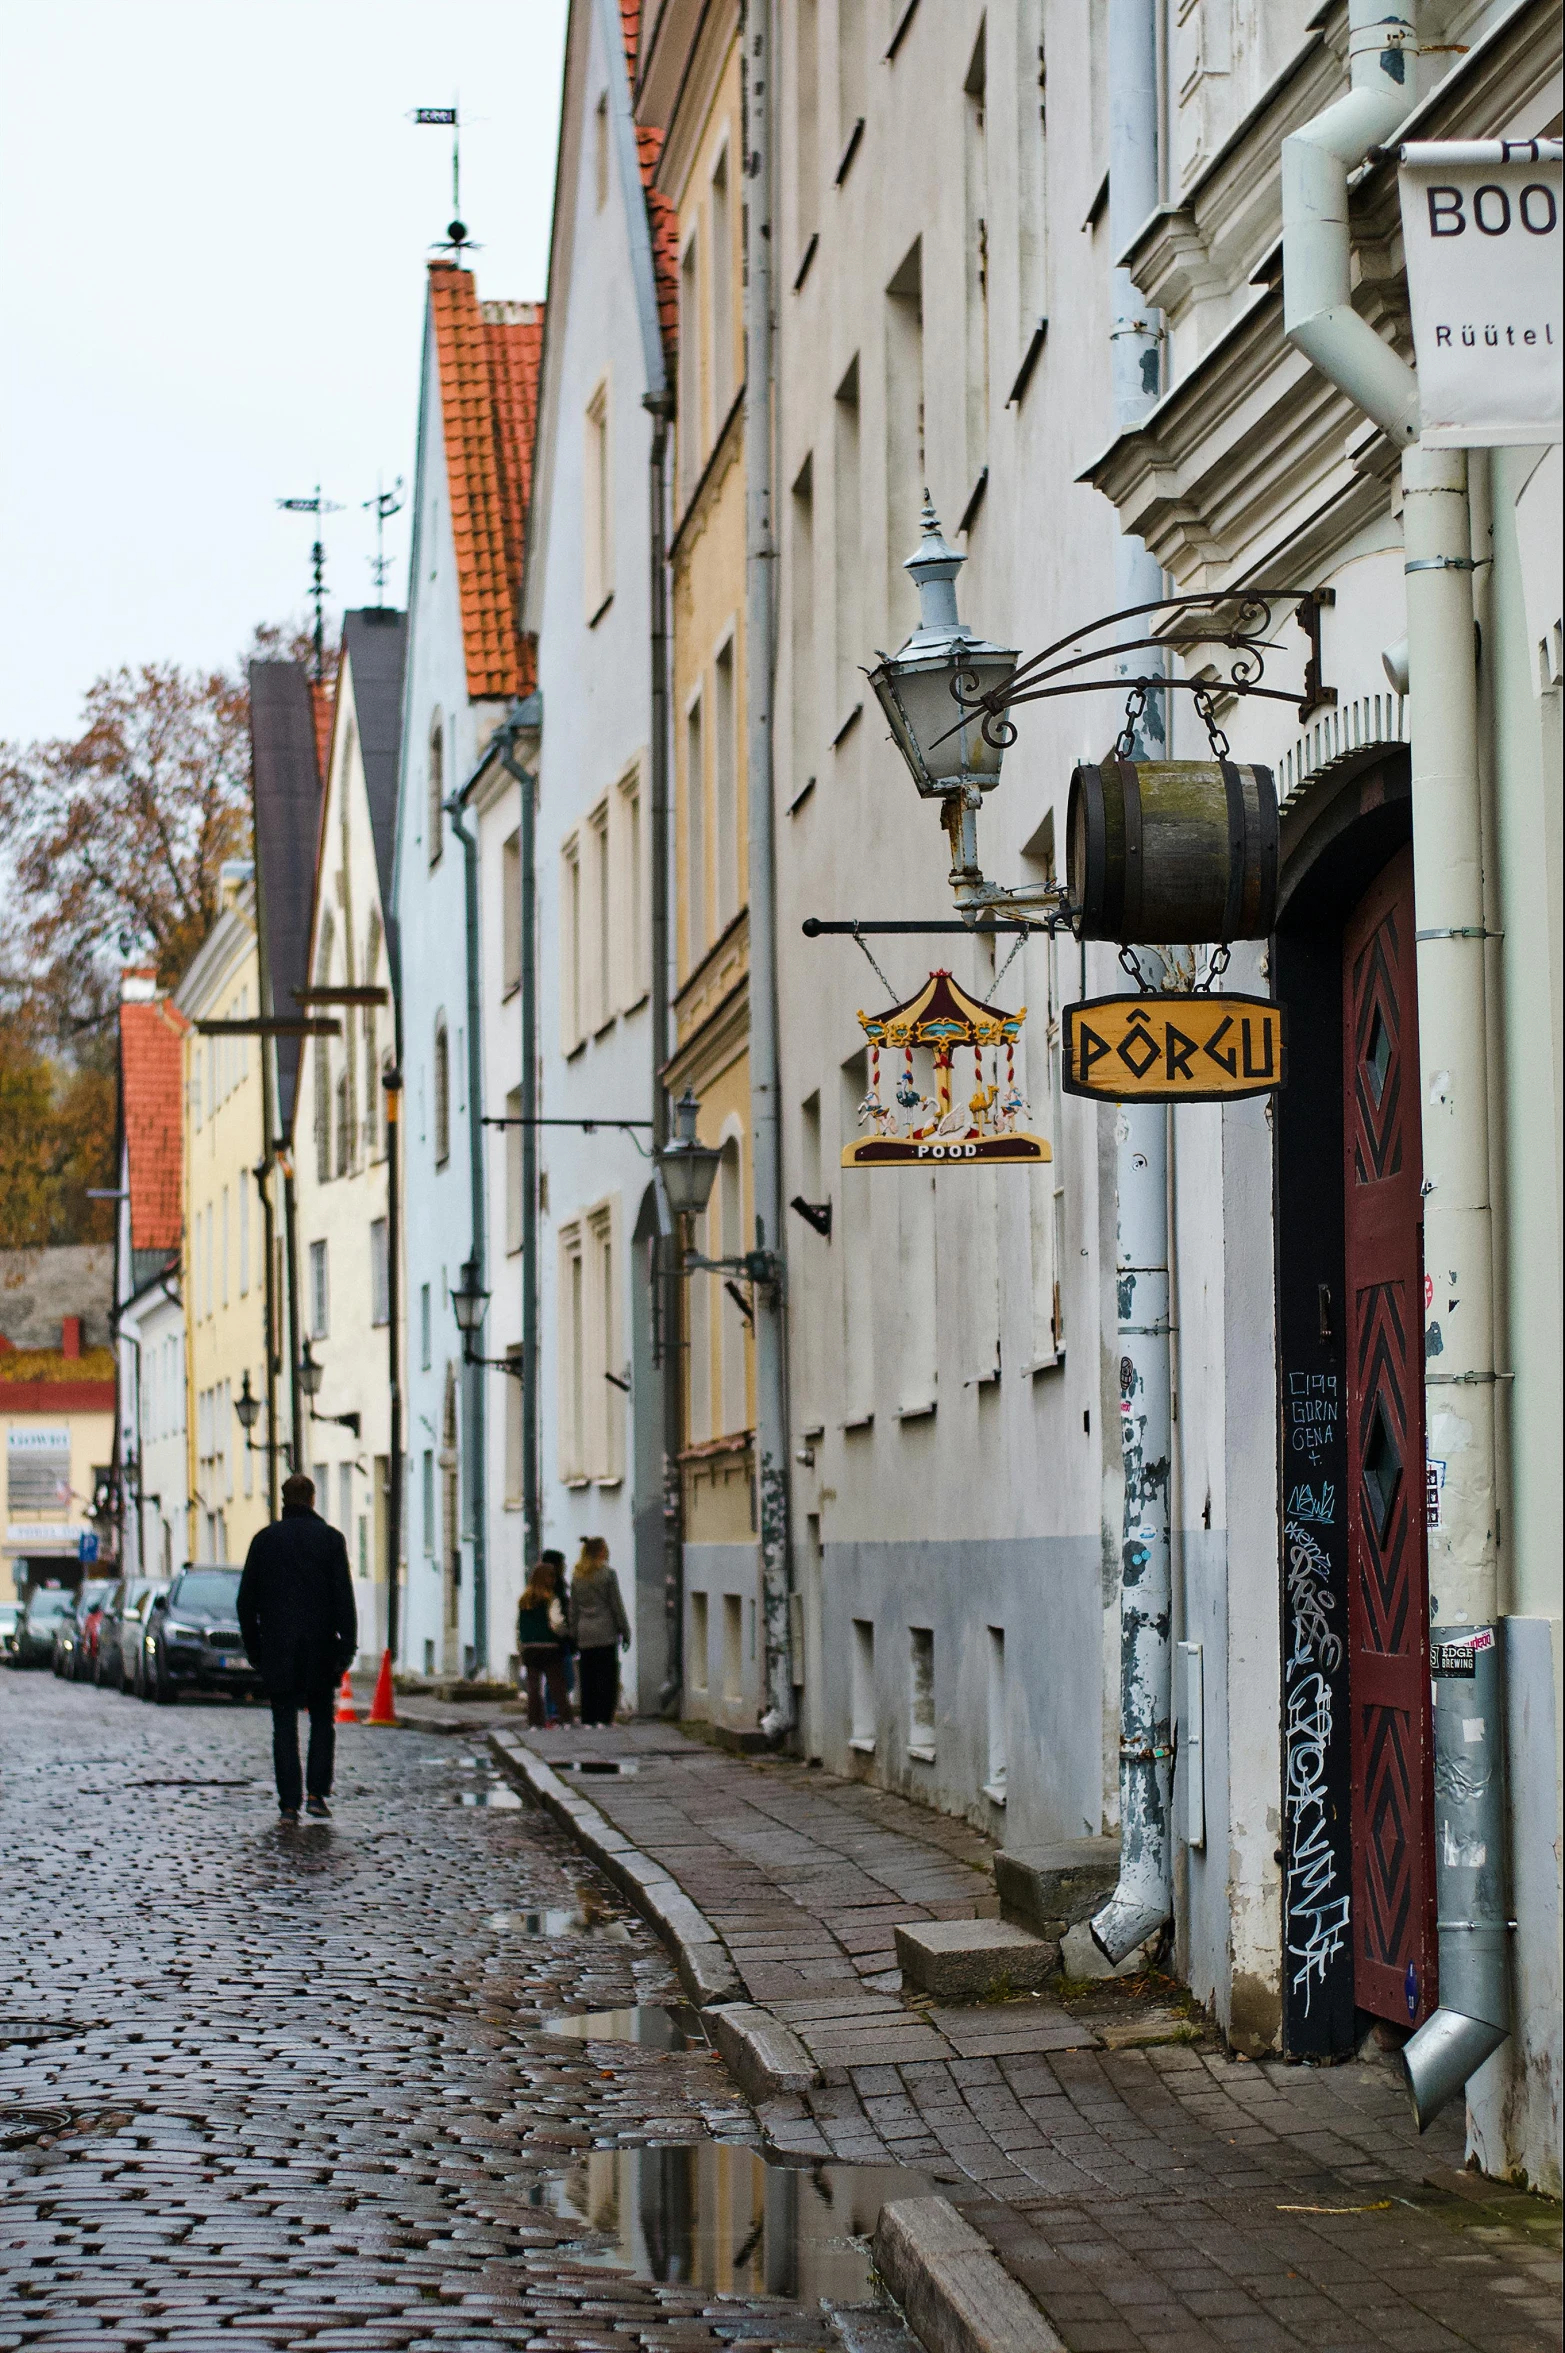 people are walking down the cobblestones on a city street